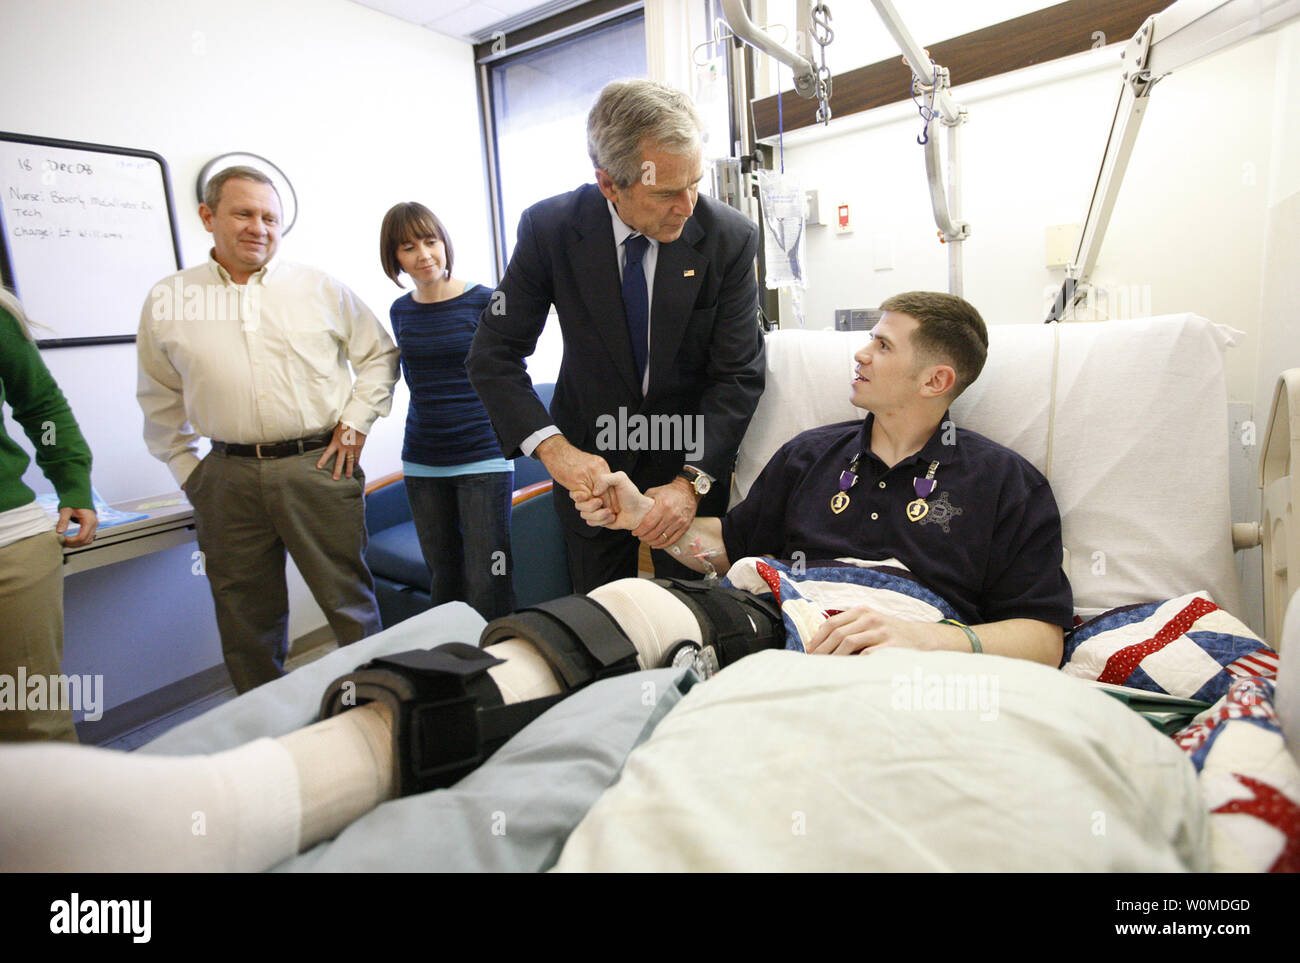 President George W. Bush shakes hands with U.S. Army Staff Sgt.  Kyle Stipp of Avon, Indiana, after presenting him with two Purple Hearts on December 22, 2008 in Washington D.C., during a visit to Walter Reed Army Medical Center where the soldier is recovering from wounds suffered in the war in Iraq.   (UPI Photo/Eric Draper/White House) Stock Photo